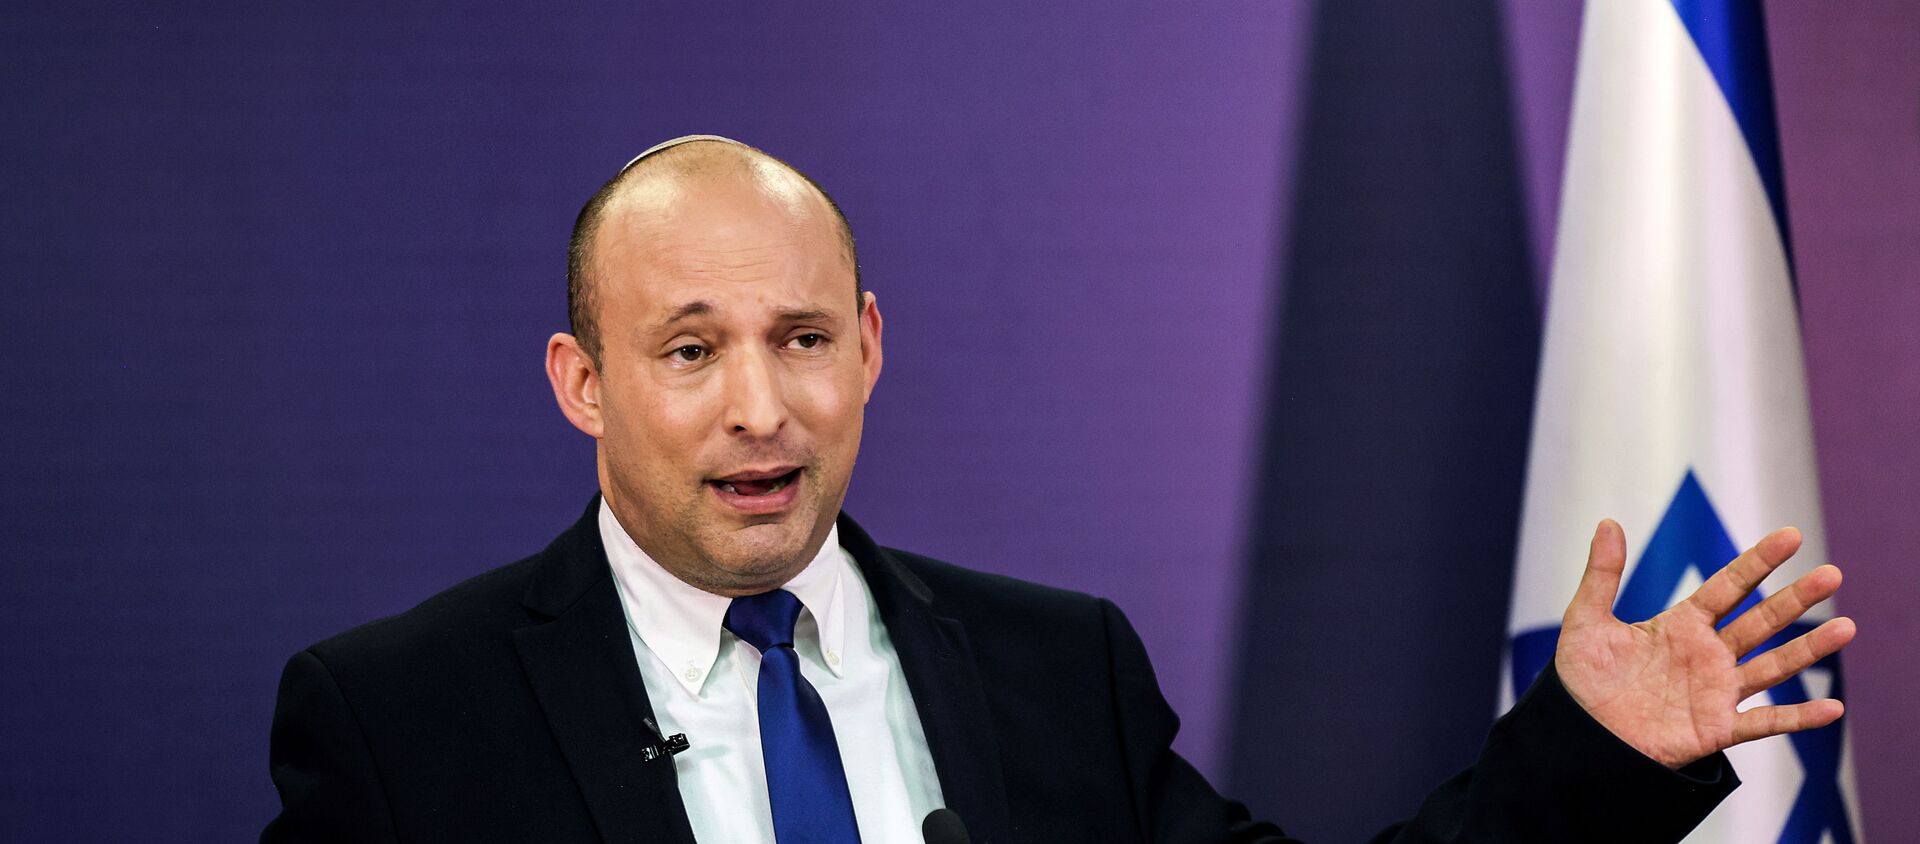 Naftali Bennett, Israeli parliament member from the Yamina party, gestures as he gives a statement at the Knesset, Israel's parliament, in Jerusalem, June 6, 2021 - Sputnik International, 1920, 13.06.2021